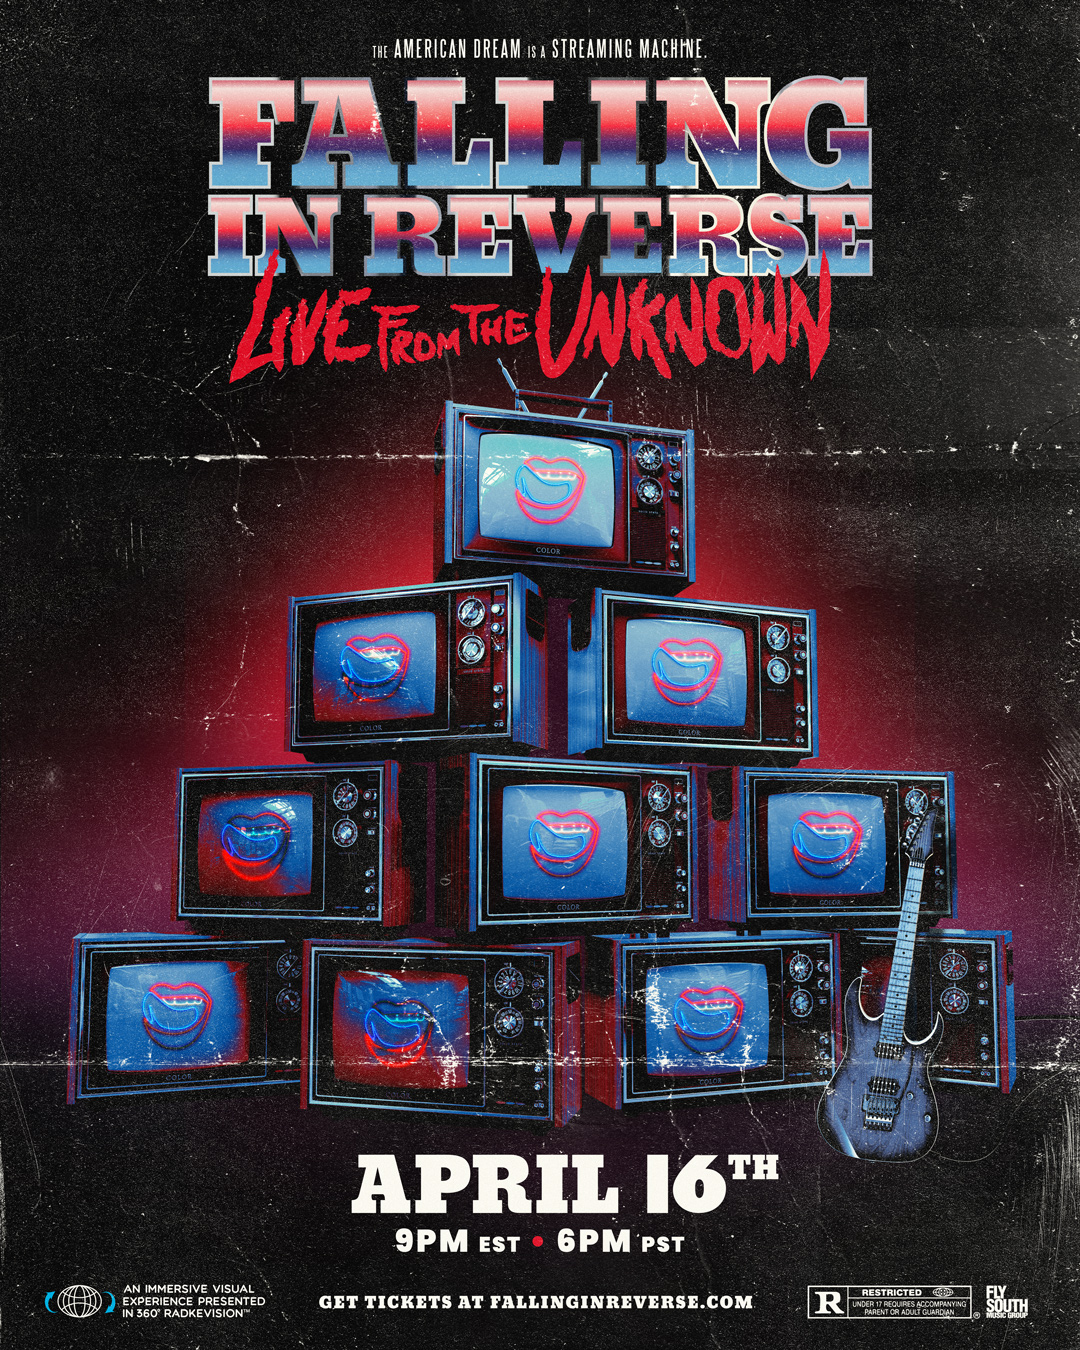 Falling In Reverse Release Cinematic Video For "I'm Not A Vampire (Revamped)" + Band Announces "Live From the Unknown"